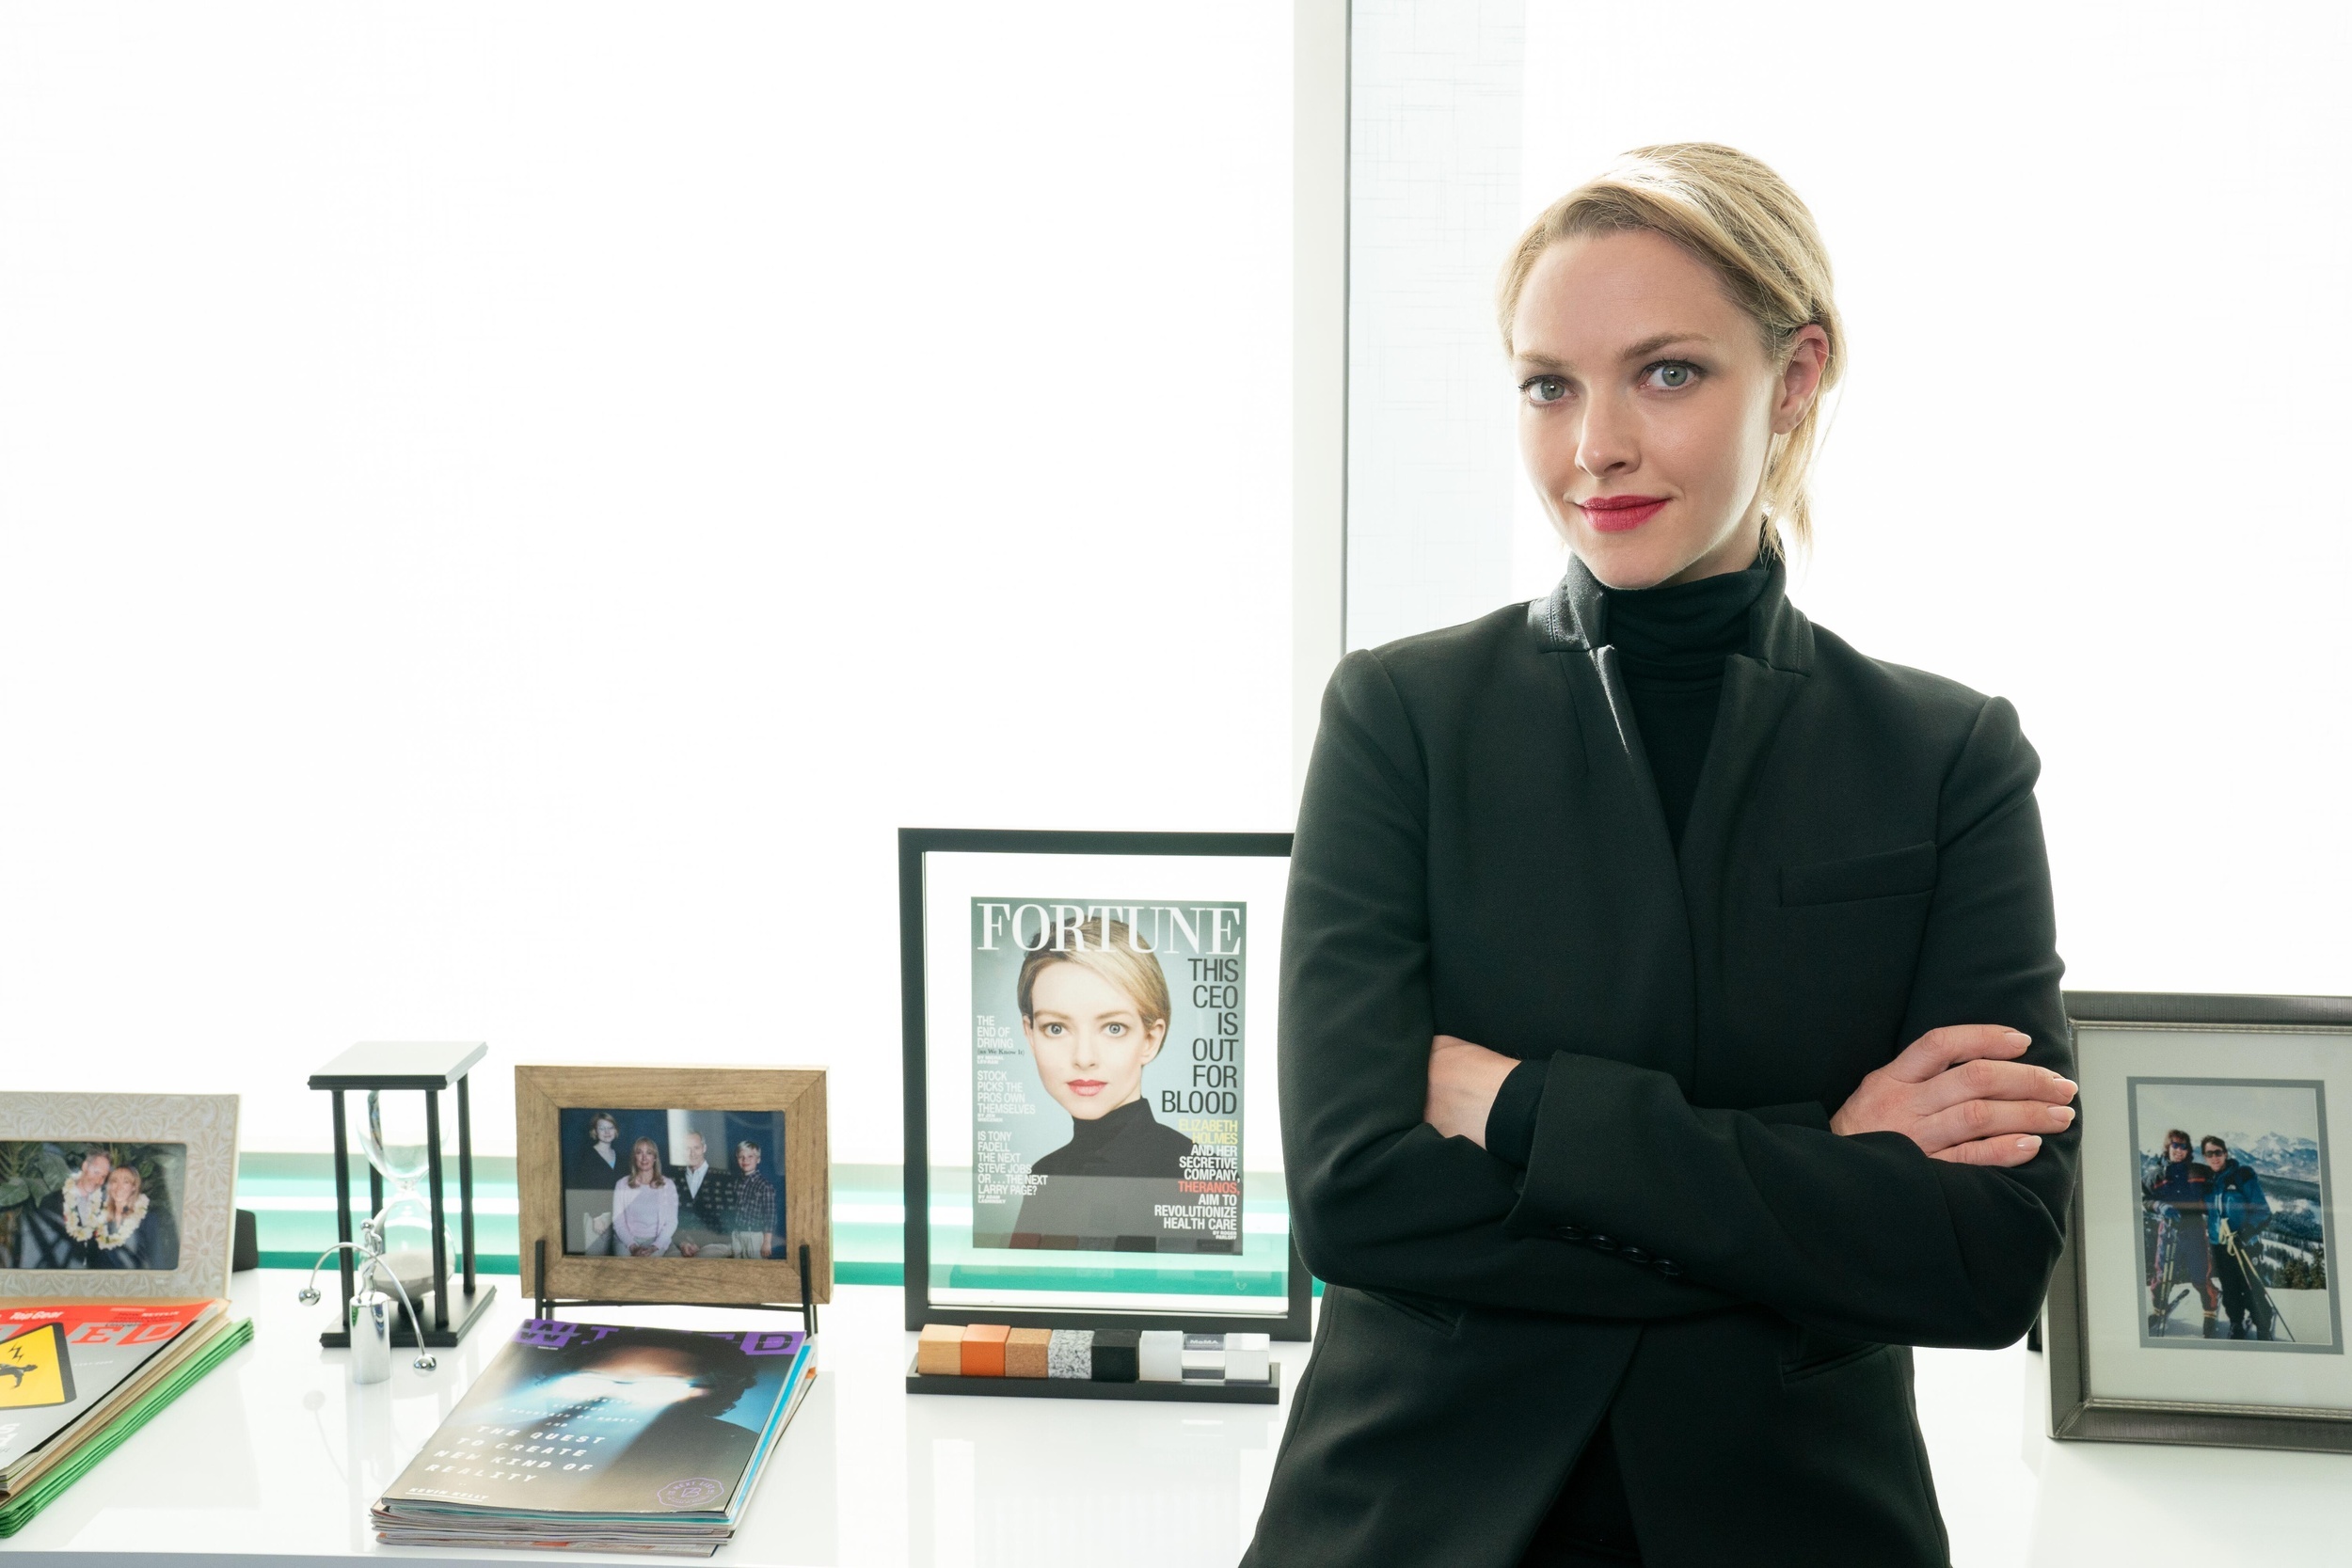 <p>Amanda Seyfried is uncanny as Elizabeth Holmes, the Silicon Valley CEO who is on her way to prison for defrauding investors over her company's technology — or lack thereof — in this Hulu dramatization of the Theranos saga. </p><p><a href='https://www.msn.com/en-us/community/channel/vid-cj9pqbr0vn9in2b6ddcd8sfgpfq6x6utp44fssrv6mc2gtybw0us'>Follow us on MSN to see more of our exclusive entertainment content.</a></p>